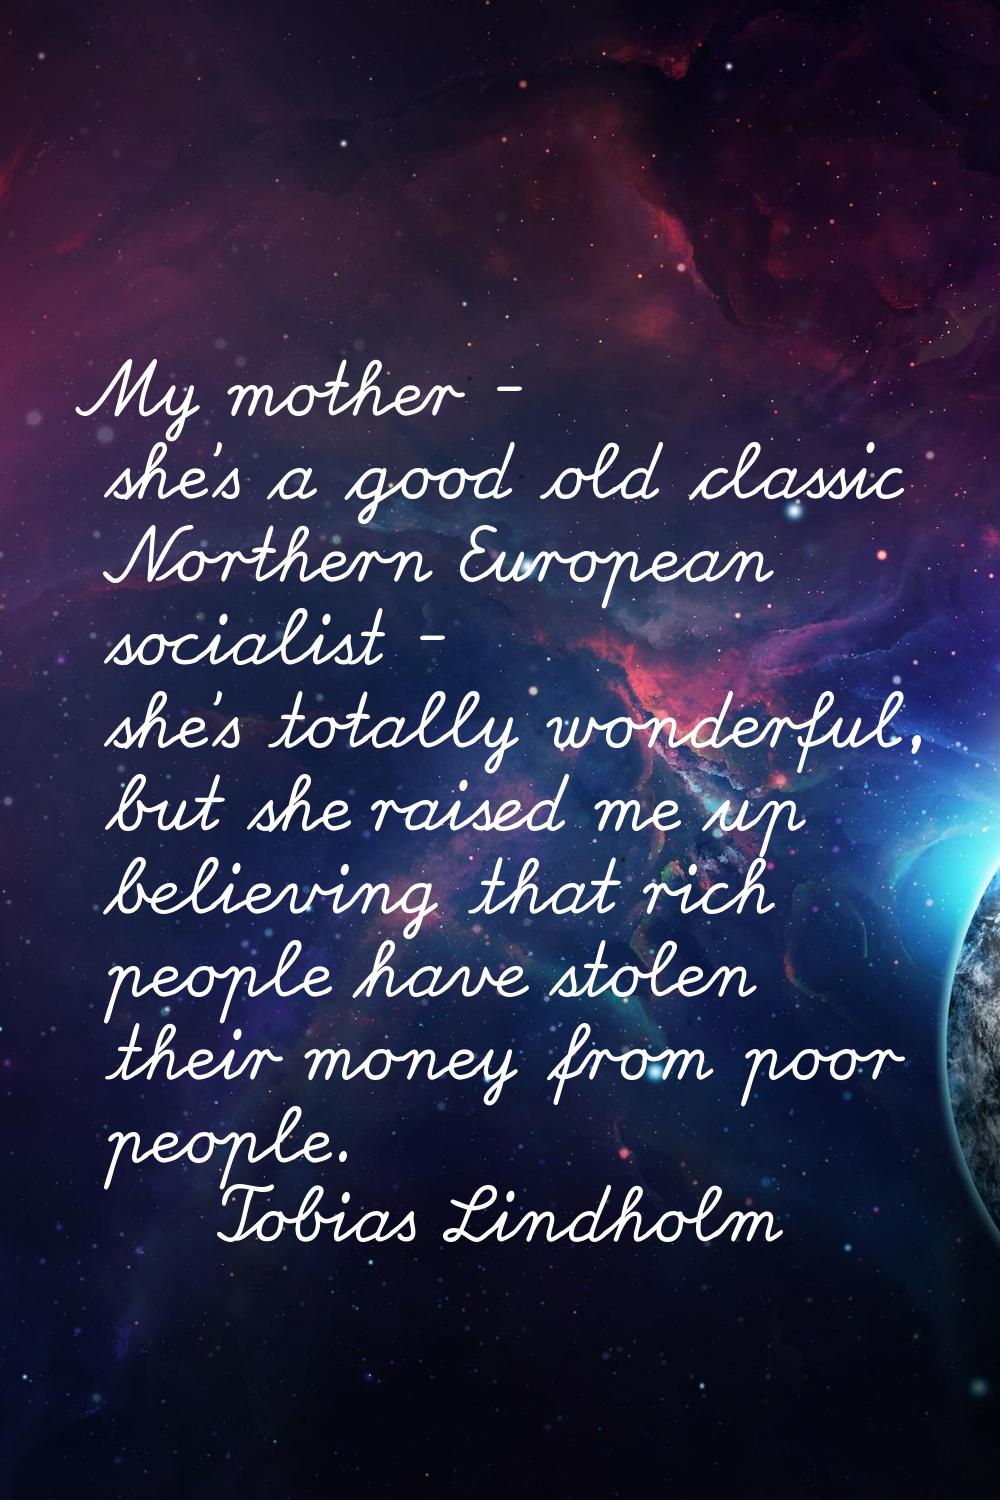 My mother - she's a good old classic Northern European socialist - she's totally wonderful, but she